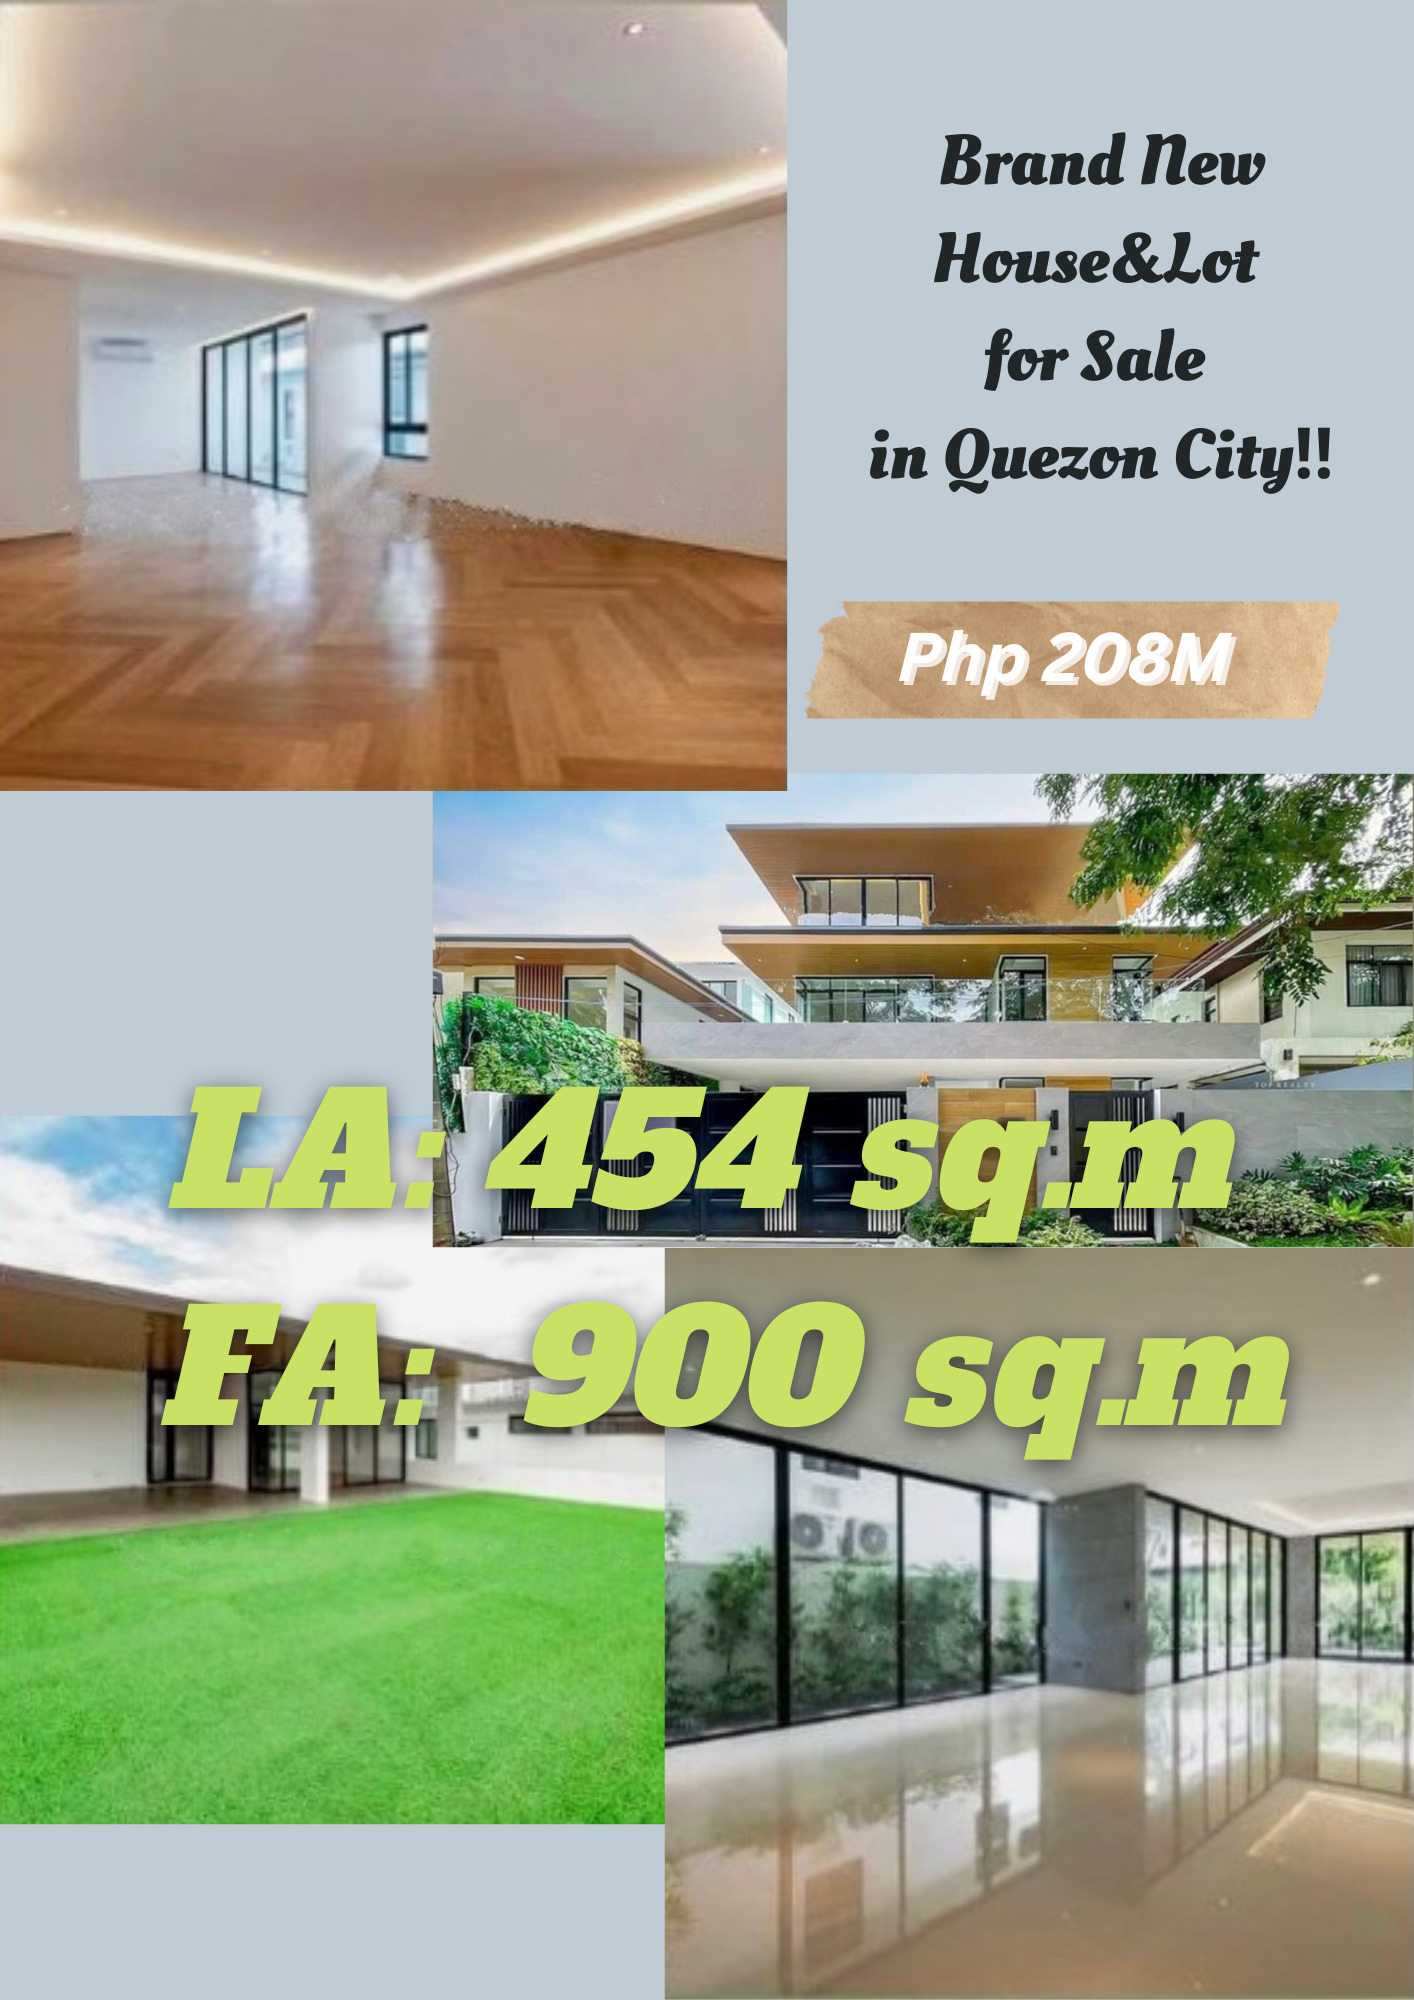 Brand New House and Lot for Sale in Quezon City‼️